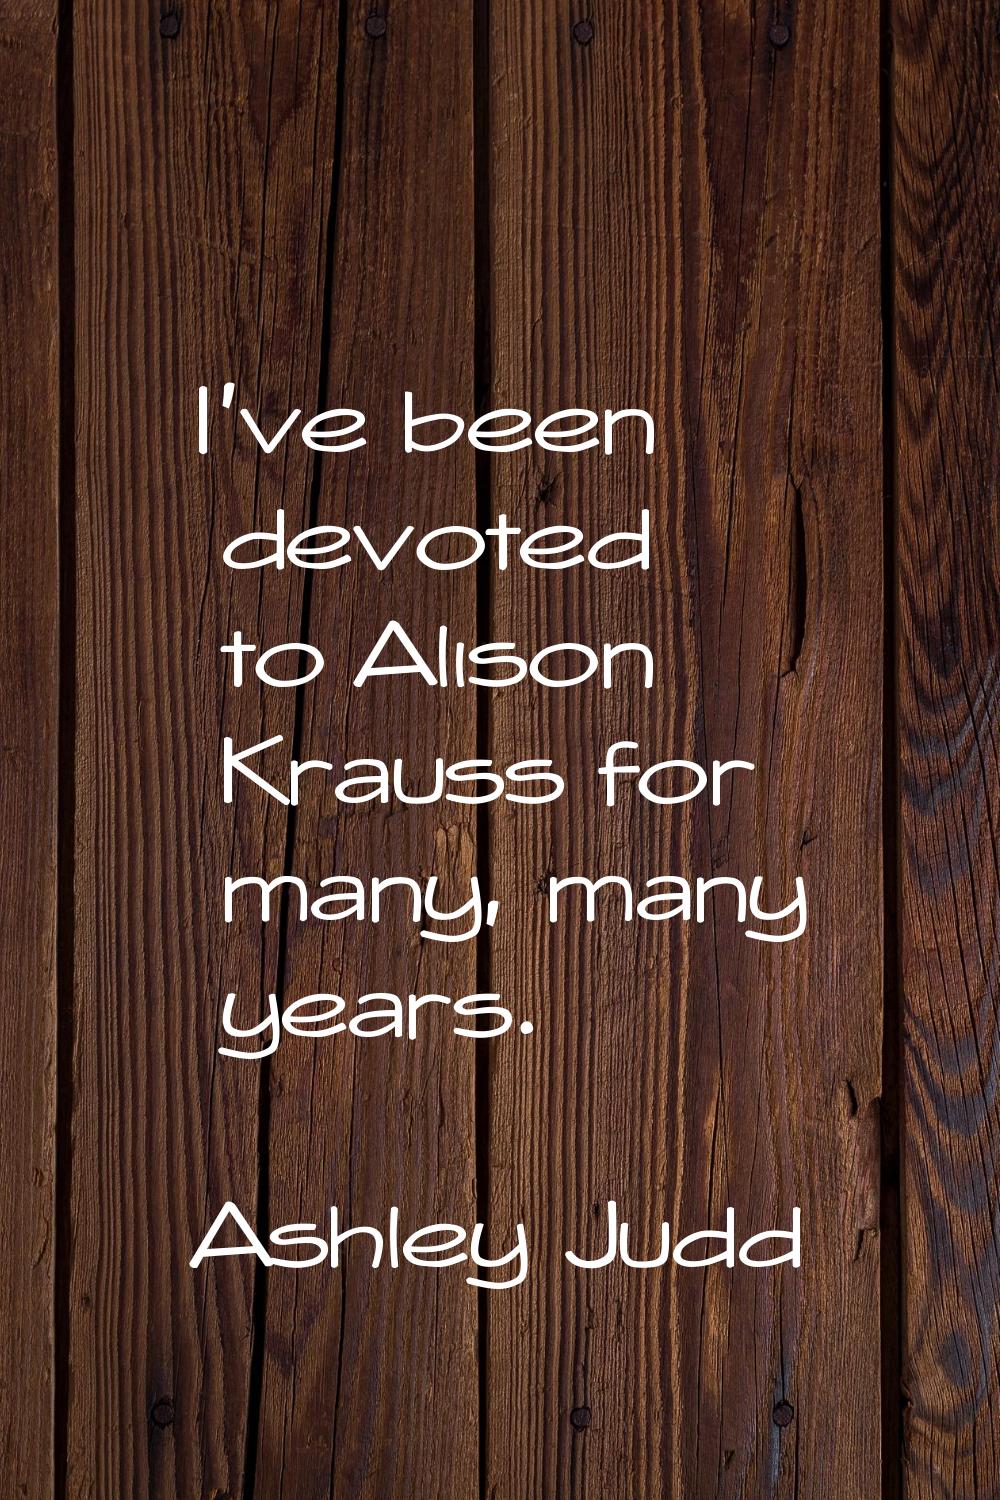 I've been devoted to Alison Krauss for many, many years.